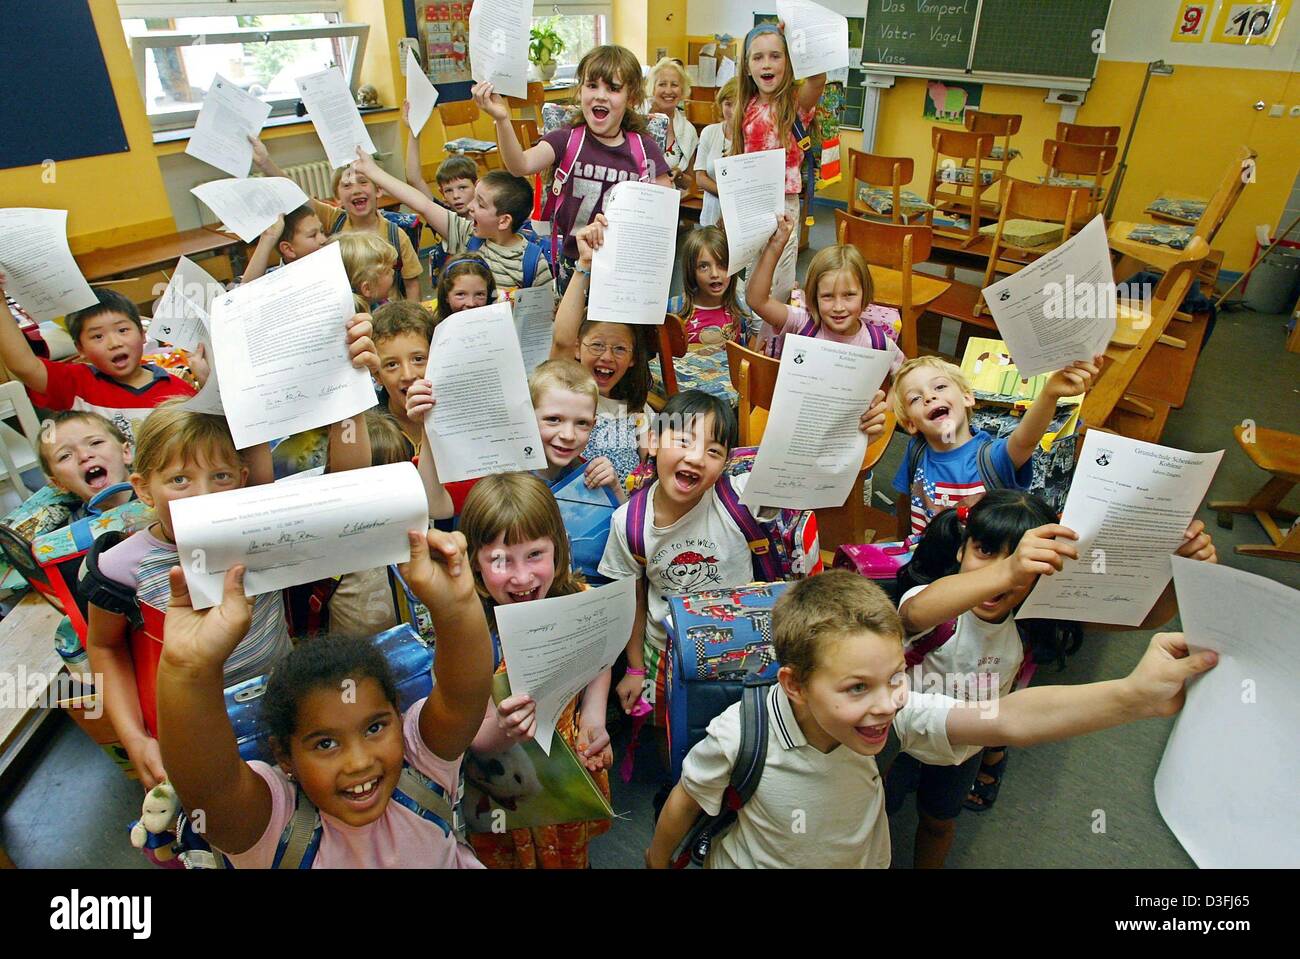 (dpa) - Students of 1st grade present their final year's certificate in their classroom at the Schenckendorff elementary school cheer in Koblenz, Germany, 18 July 2003. Six weeks of untroubled summer holidays lie in front of them. Stock Photo